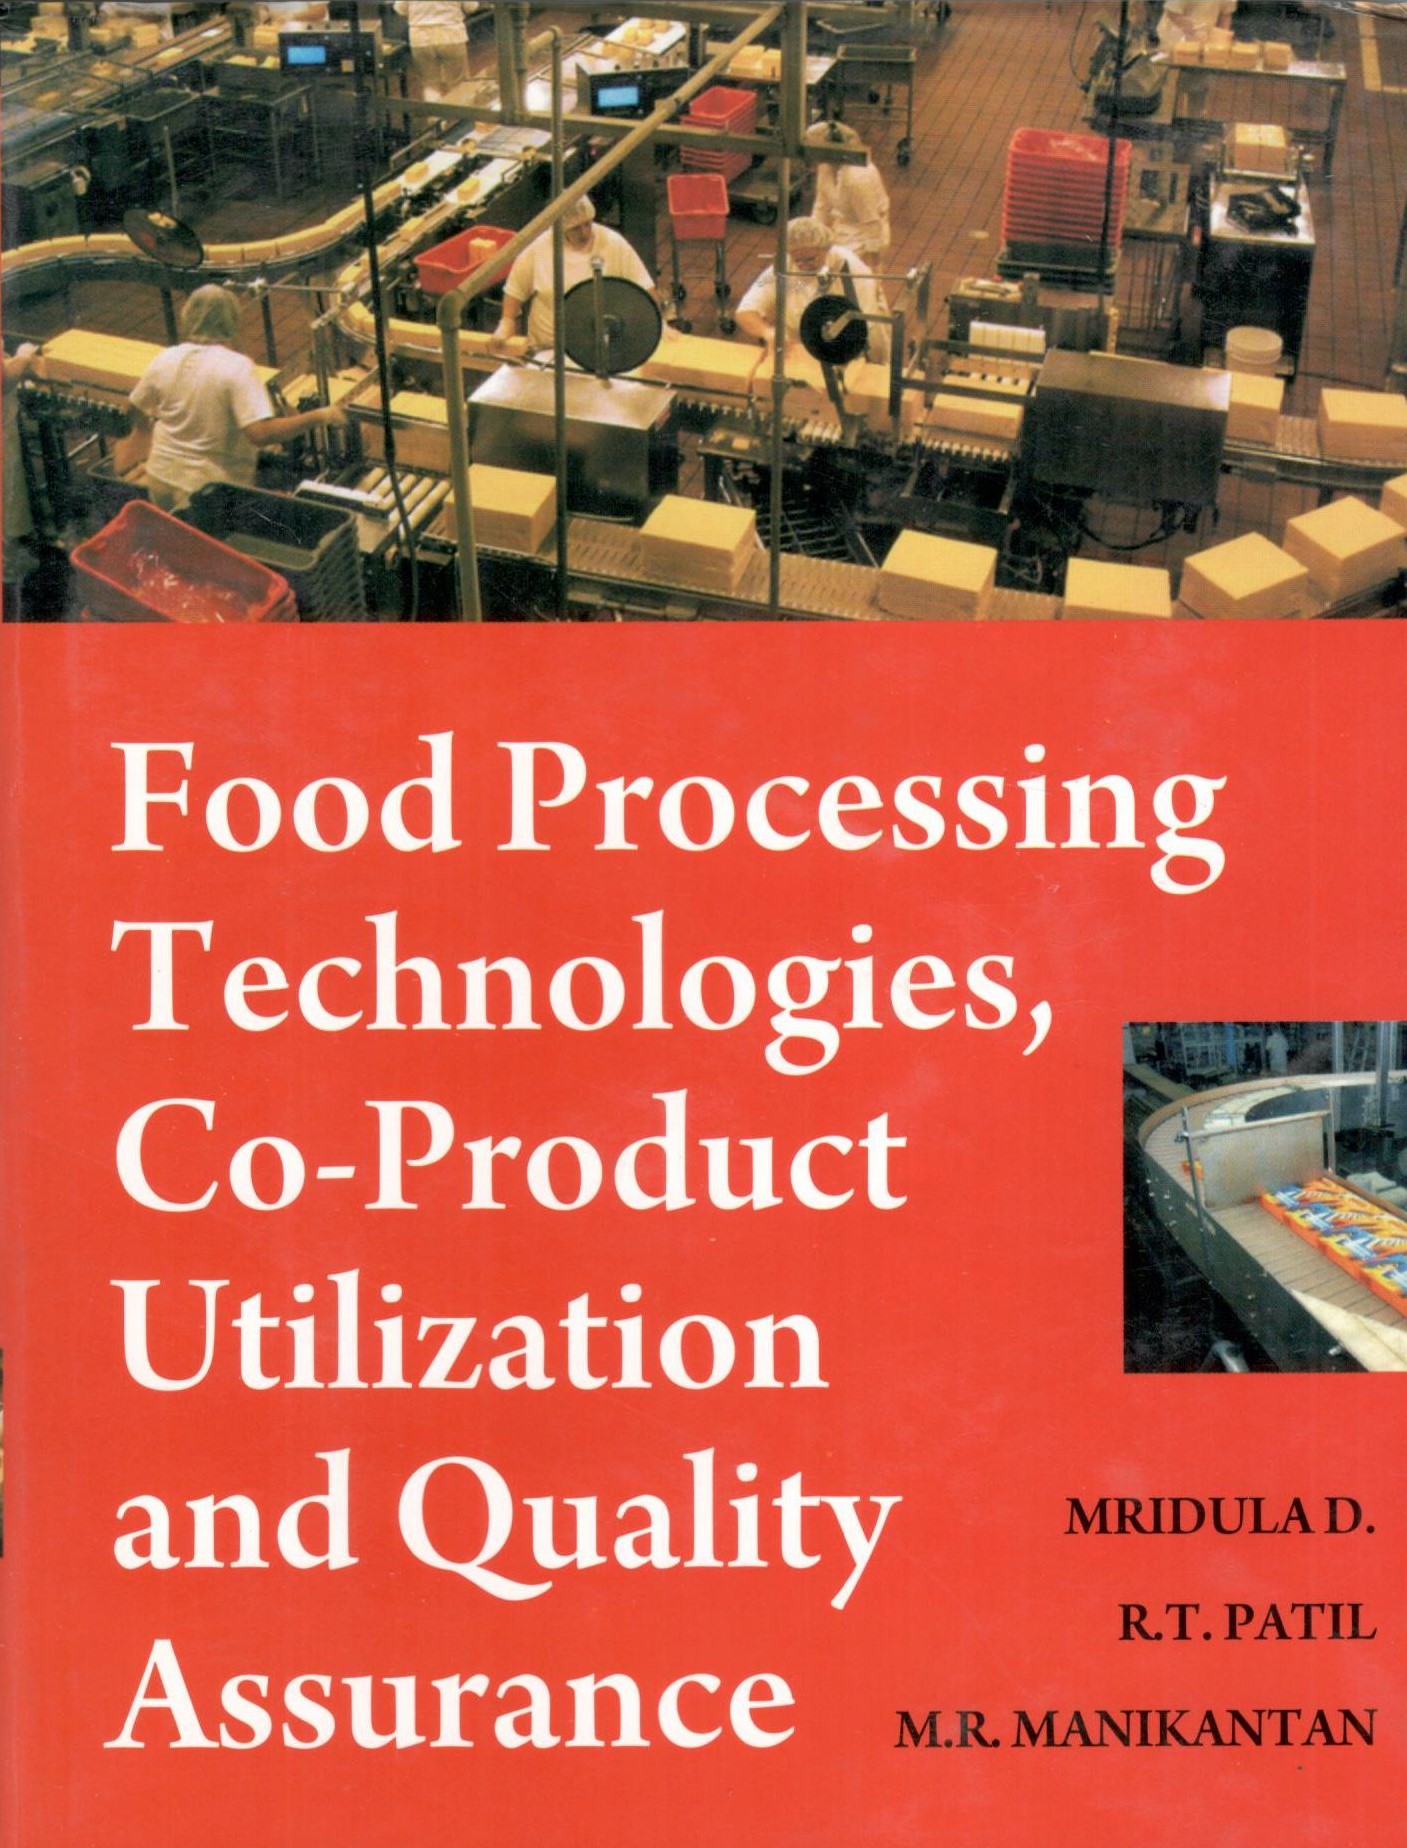 Food Processing Technologies, Co-Product Utilization And Quality Assurance